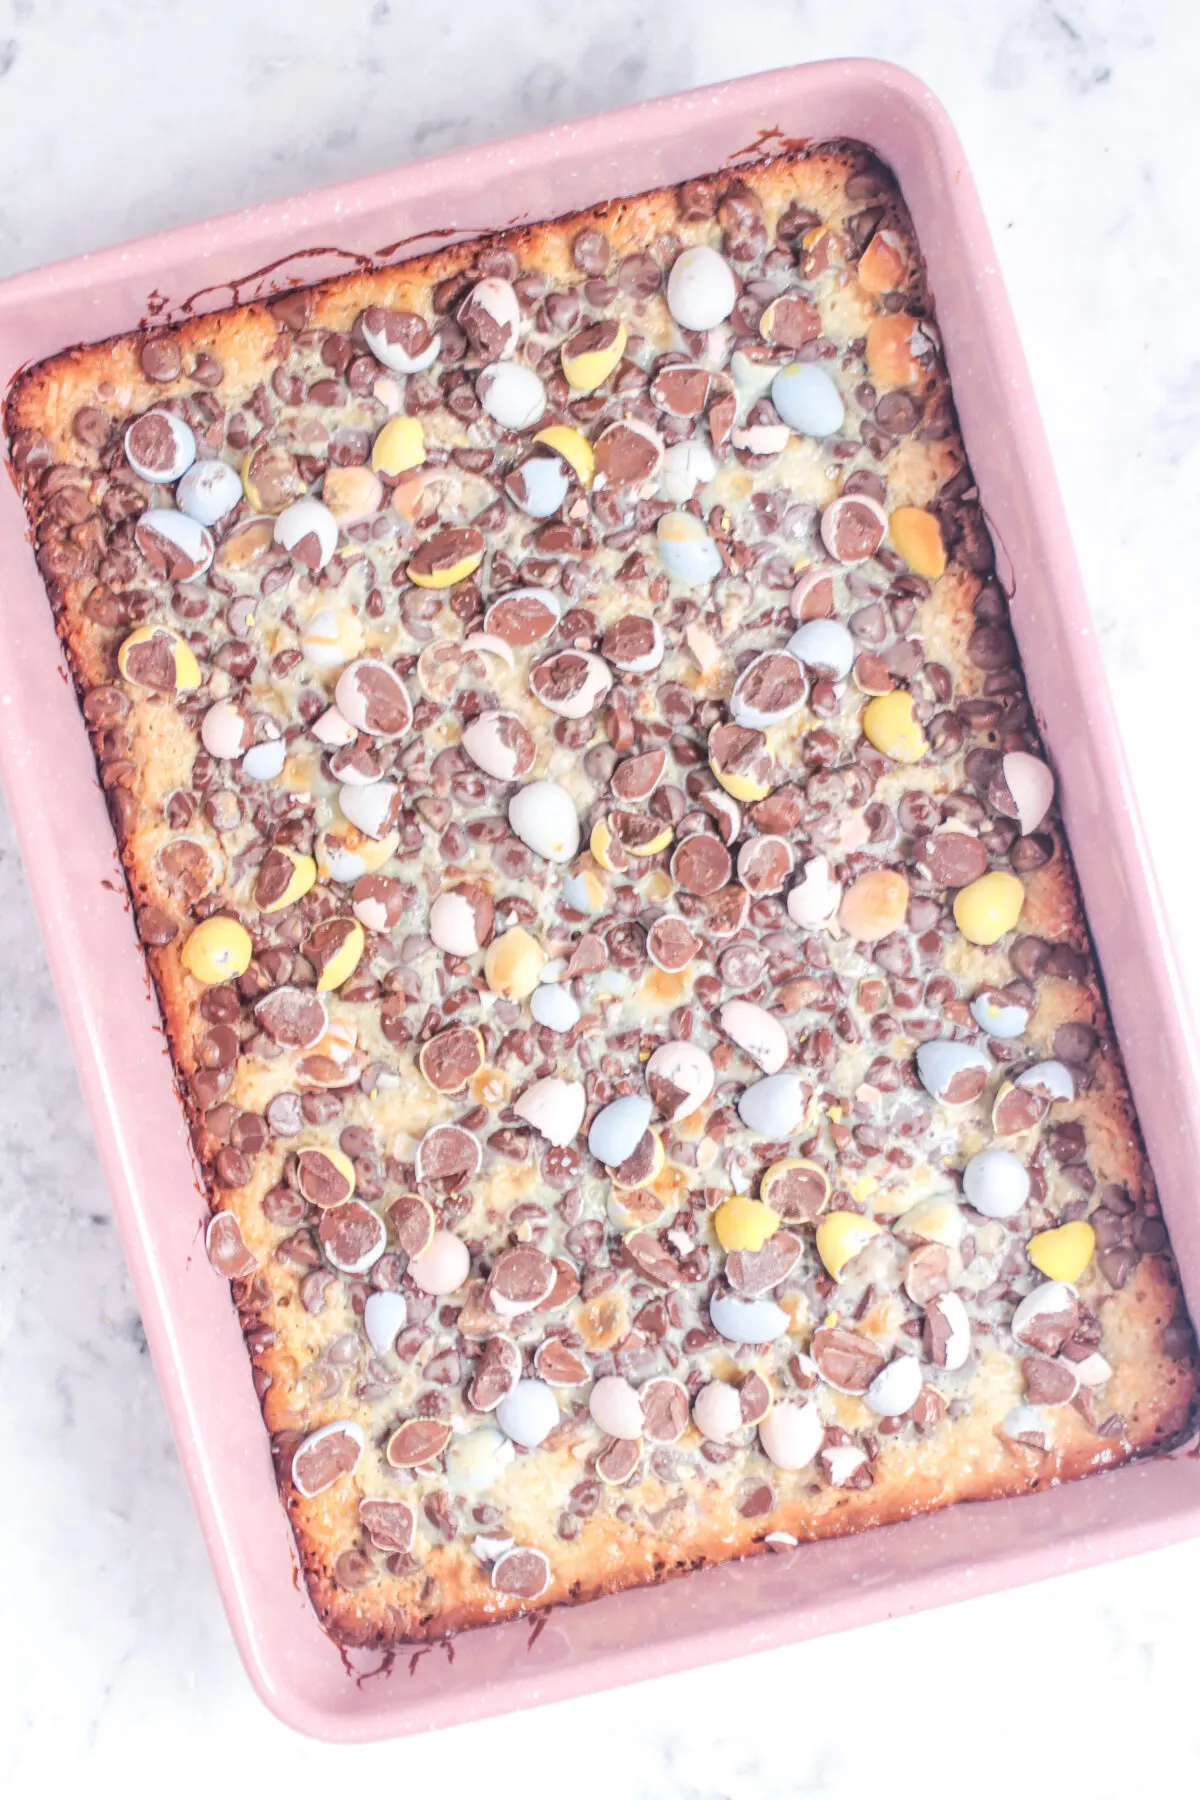 Magic cookie bar straight out of the oven and sprinkled over with more mini eggs.